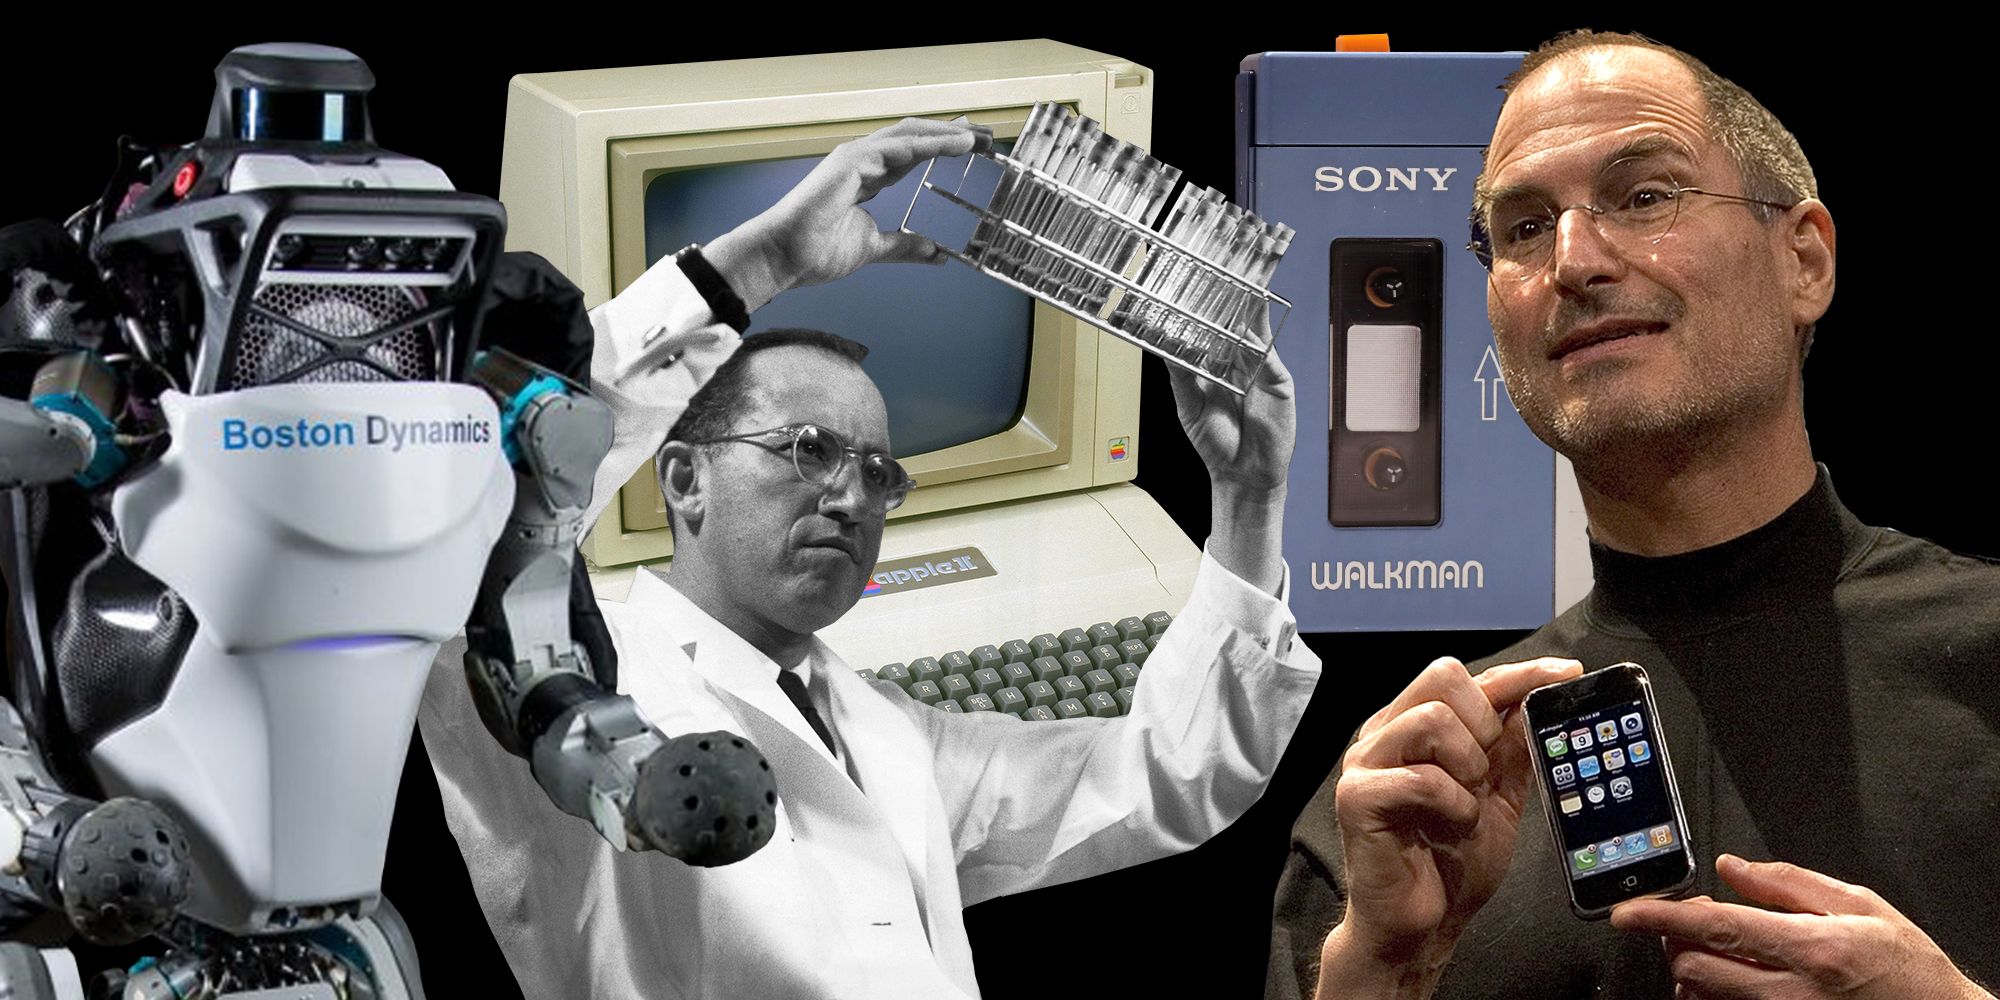 The 10 Greatest Inventions of the Past Decade